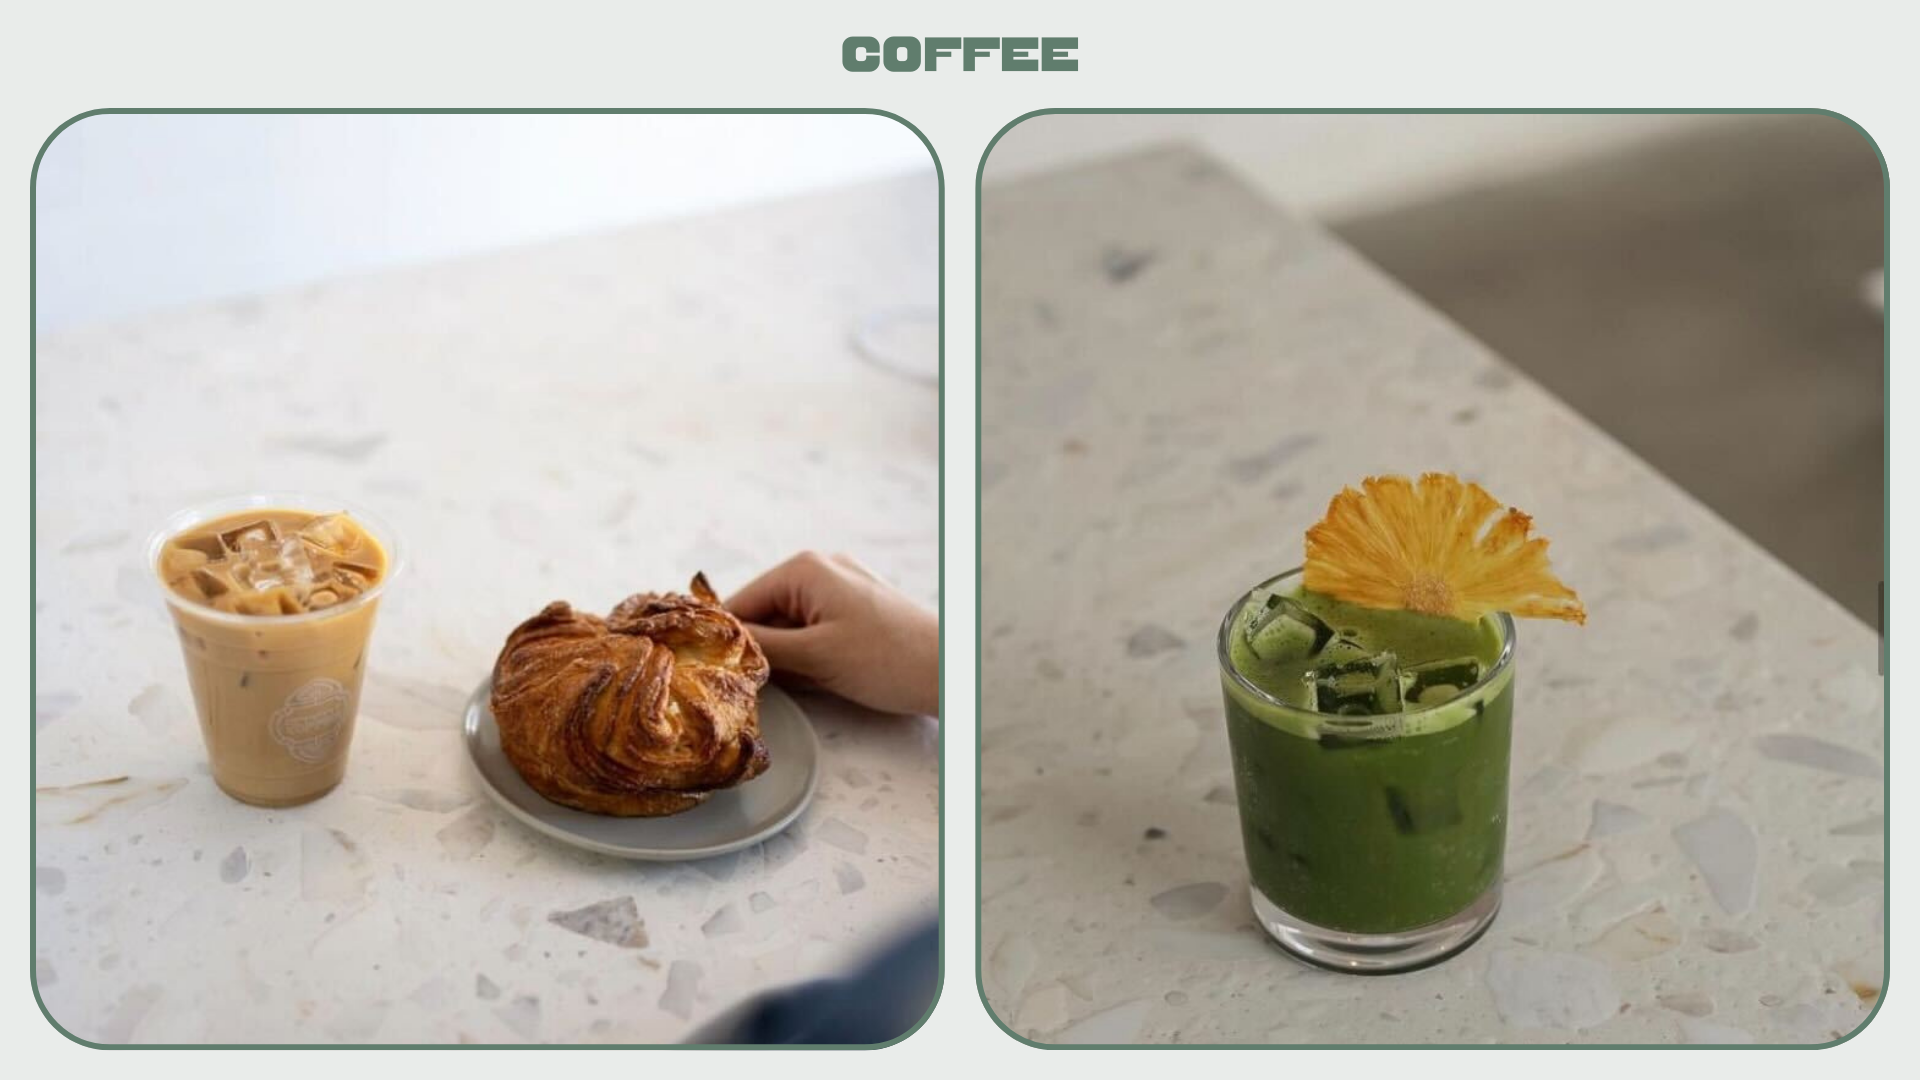 L: Iced latte and morning bun. R: Iced matcha decorated with dried pineapple